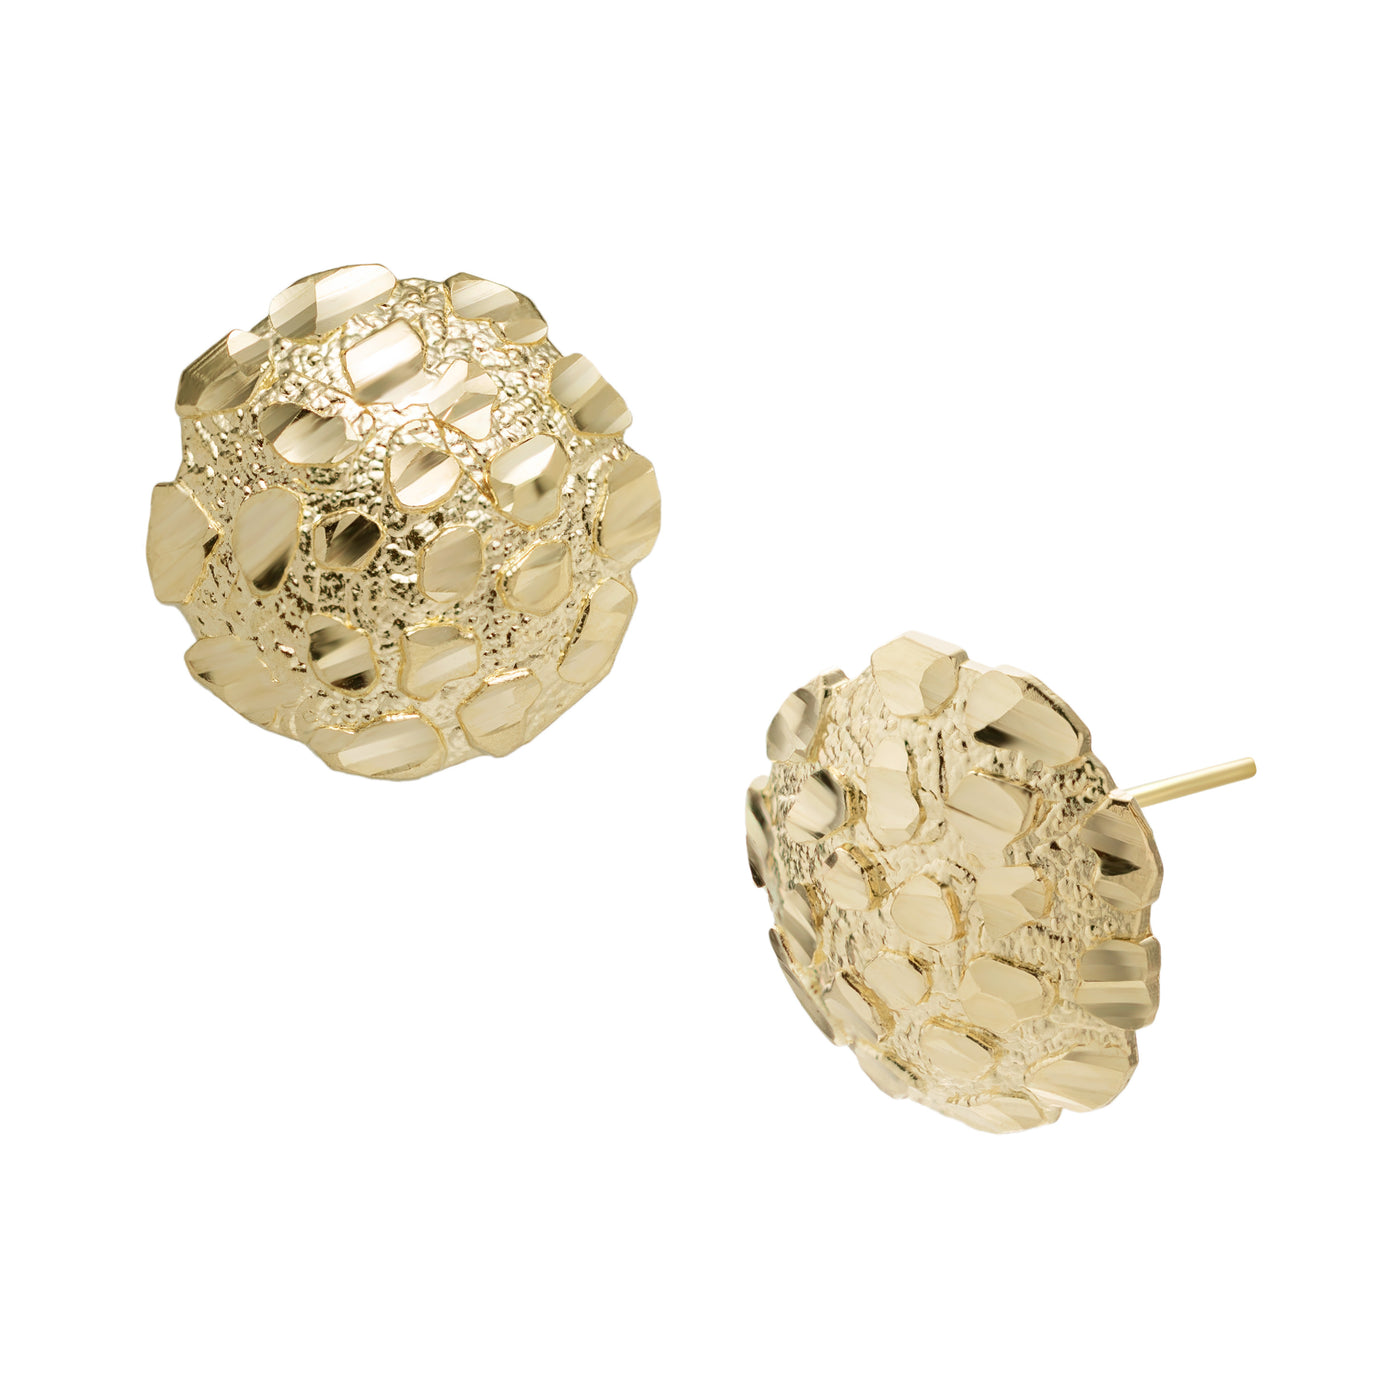 Women's Medium Round Nugget Stud Earrings Solid 10K Yellow Gold